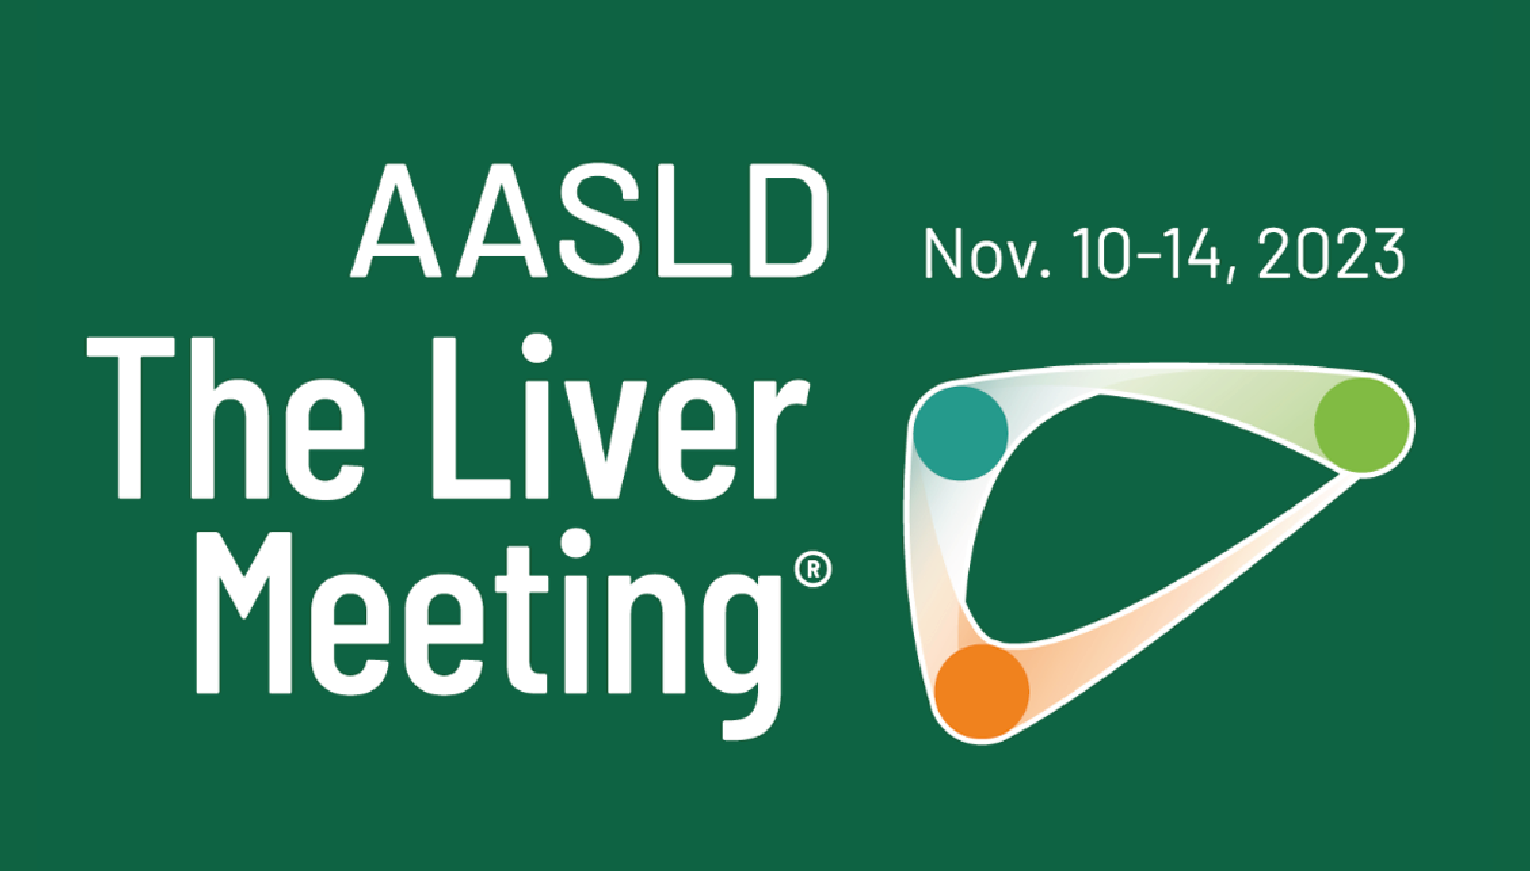 The Liver Meeting 2023